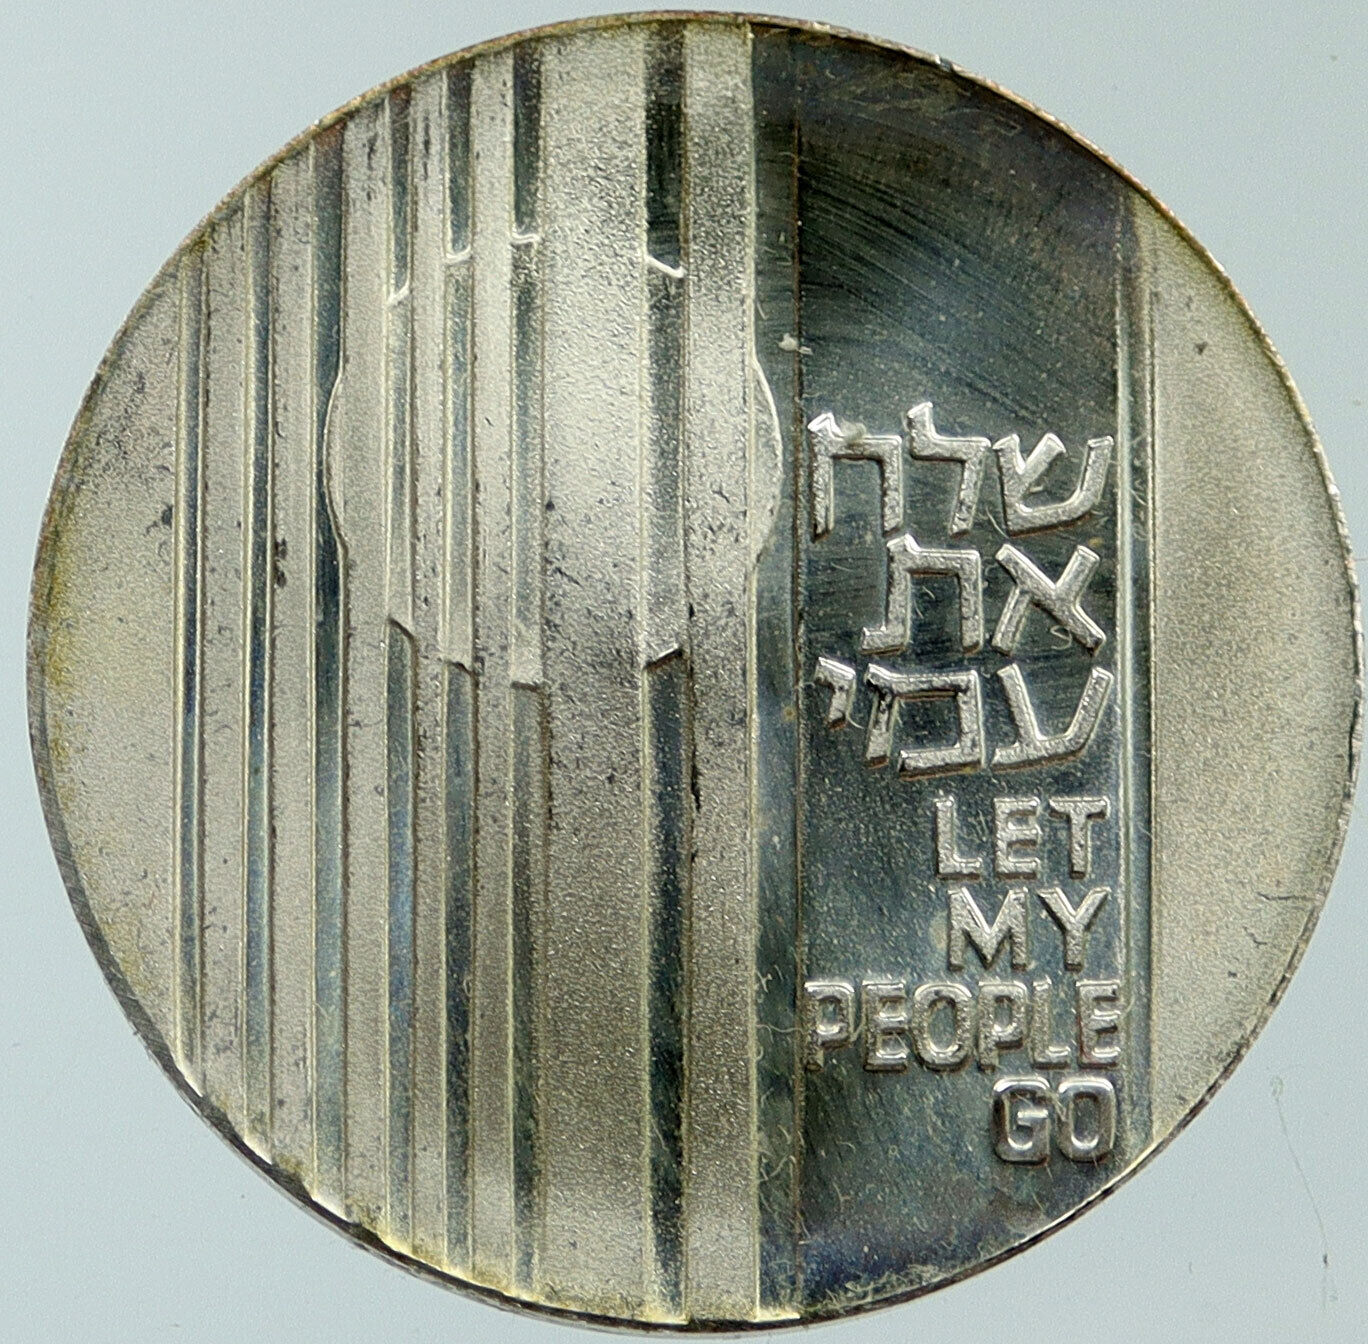 1971 ISRAEL Jewish LET MY PEOPLE GO Exodus Old BU Silver 10 Lirot Coin i116768